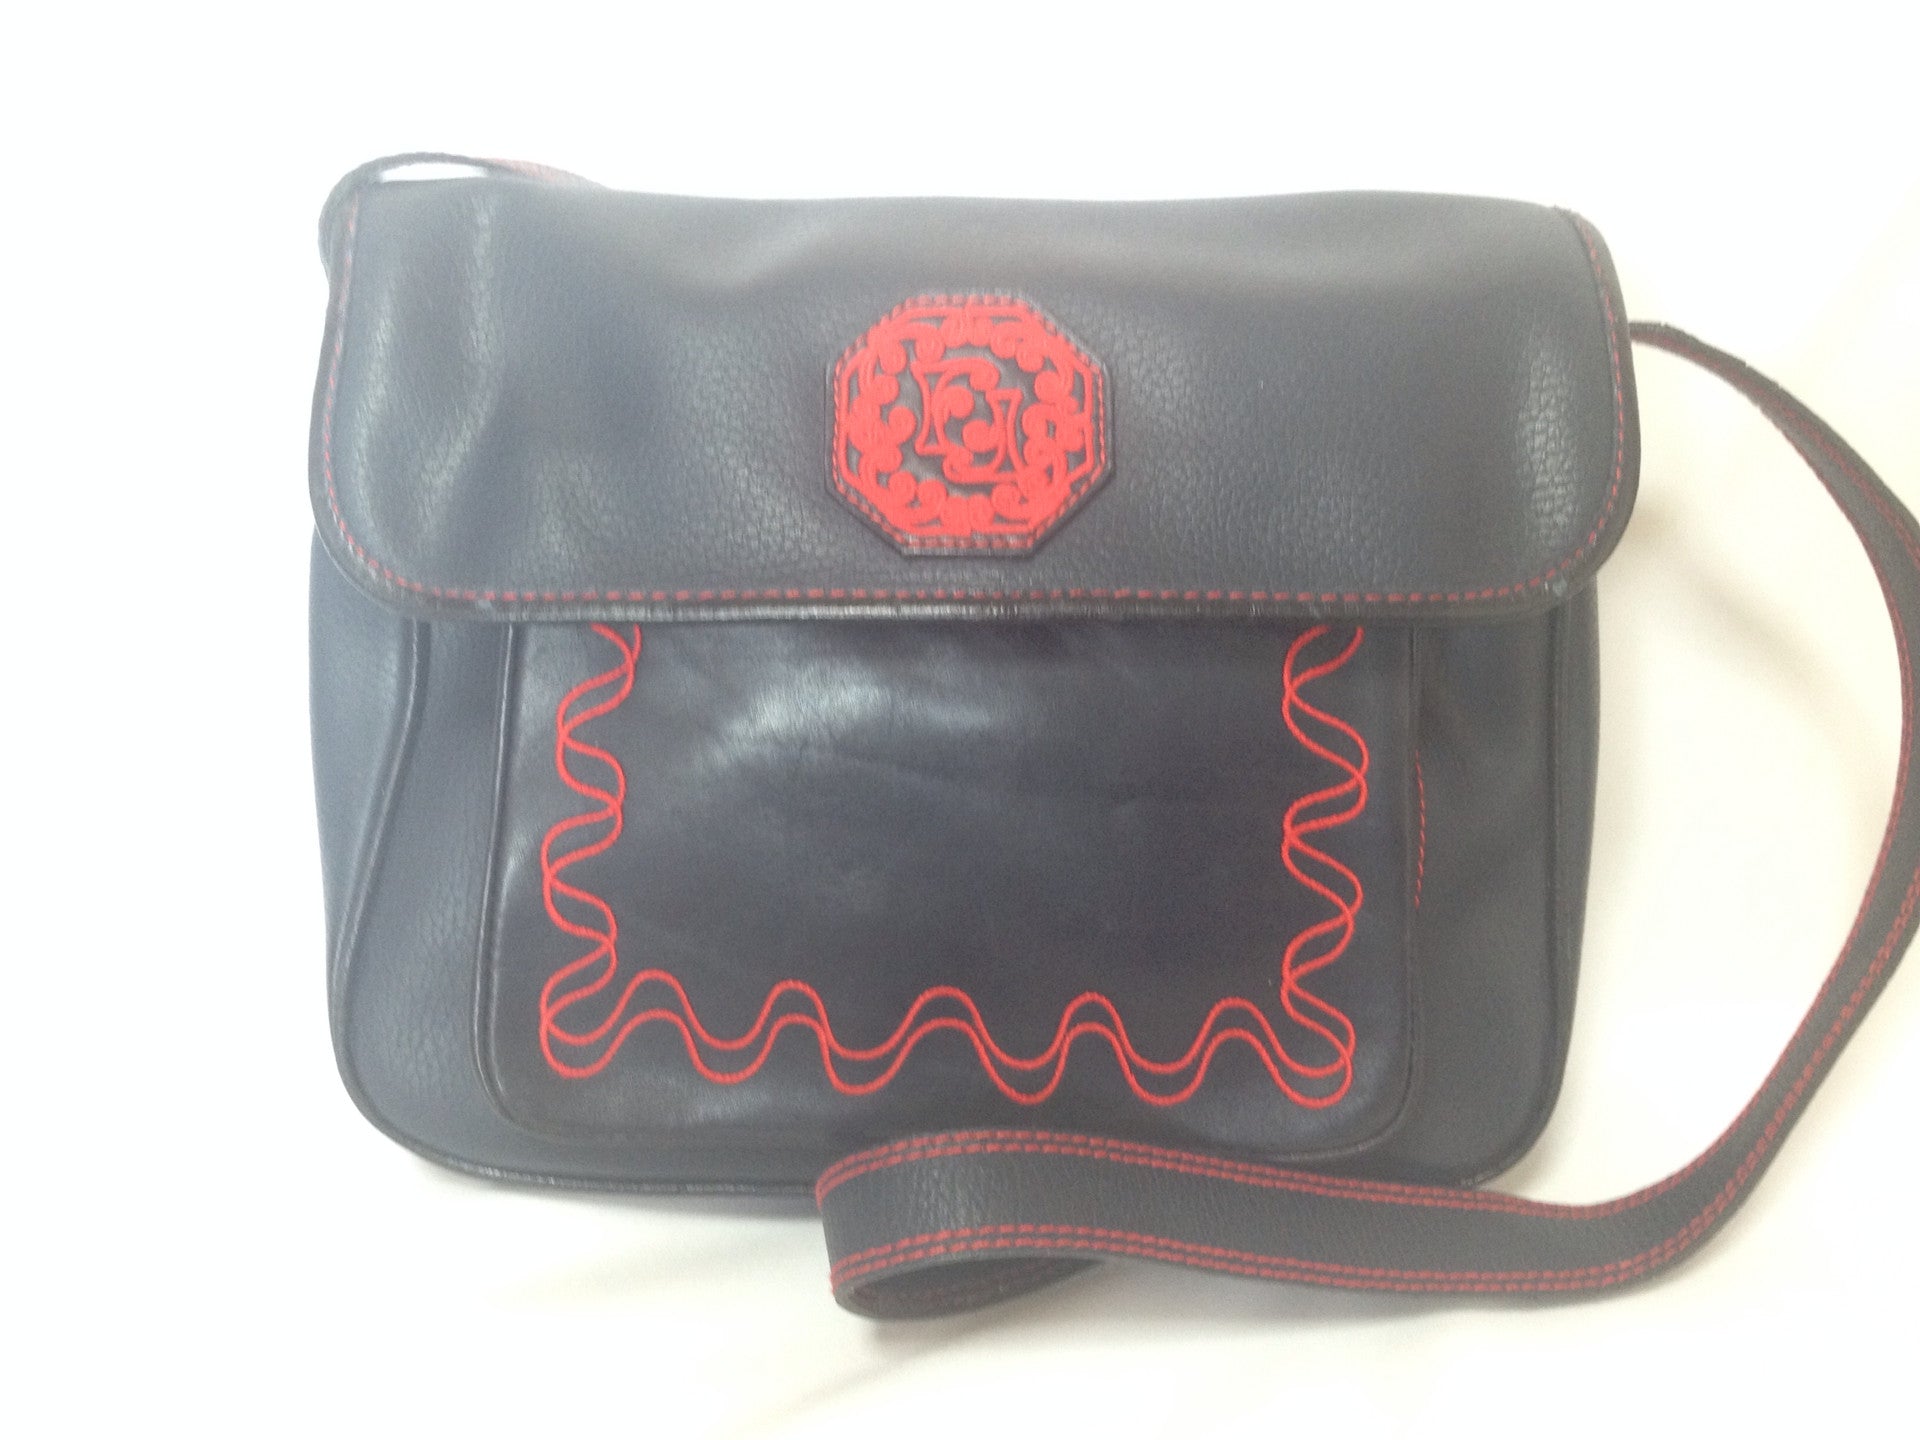 Vintage Fendi genuine navy leather shoulder bag with red embroidery logo, motif, and stitch. Rare purse.